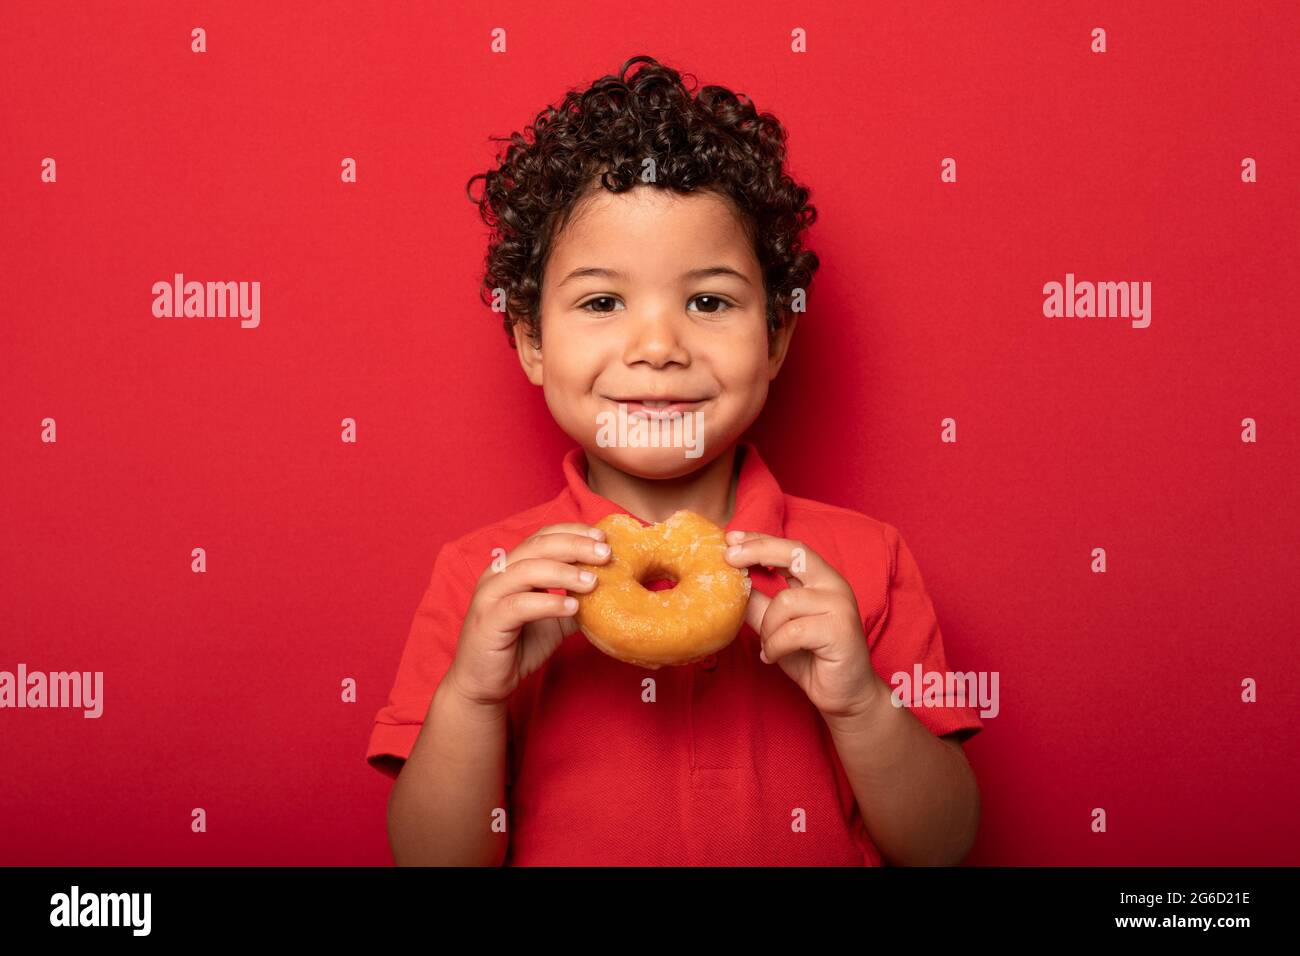 Adorable child with curly hair eating sweet tasty doughnut and looking at camera on red background Stock Photo